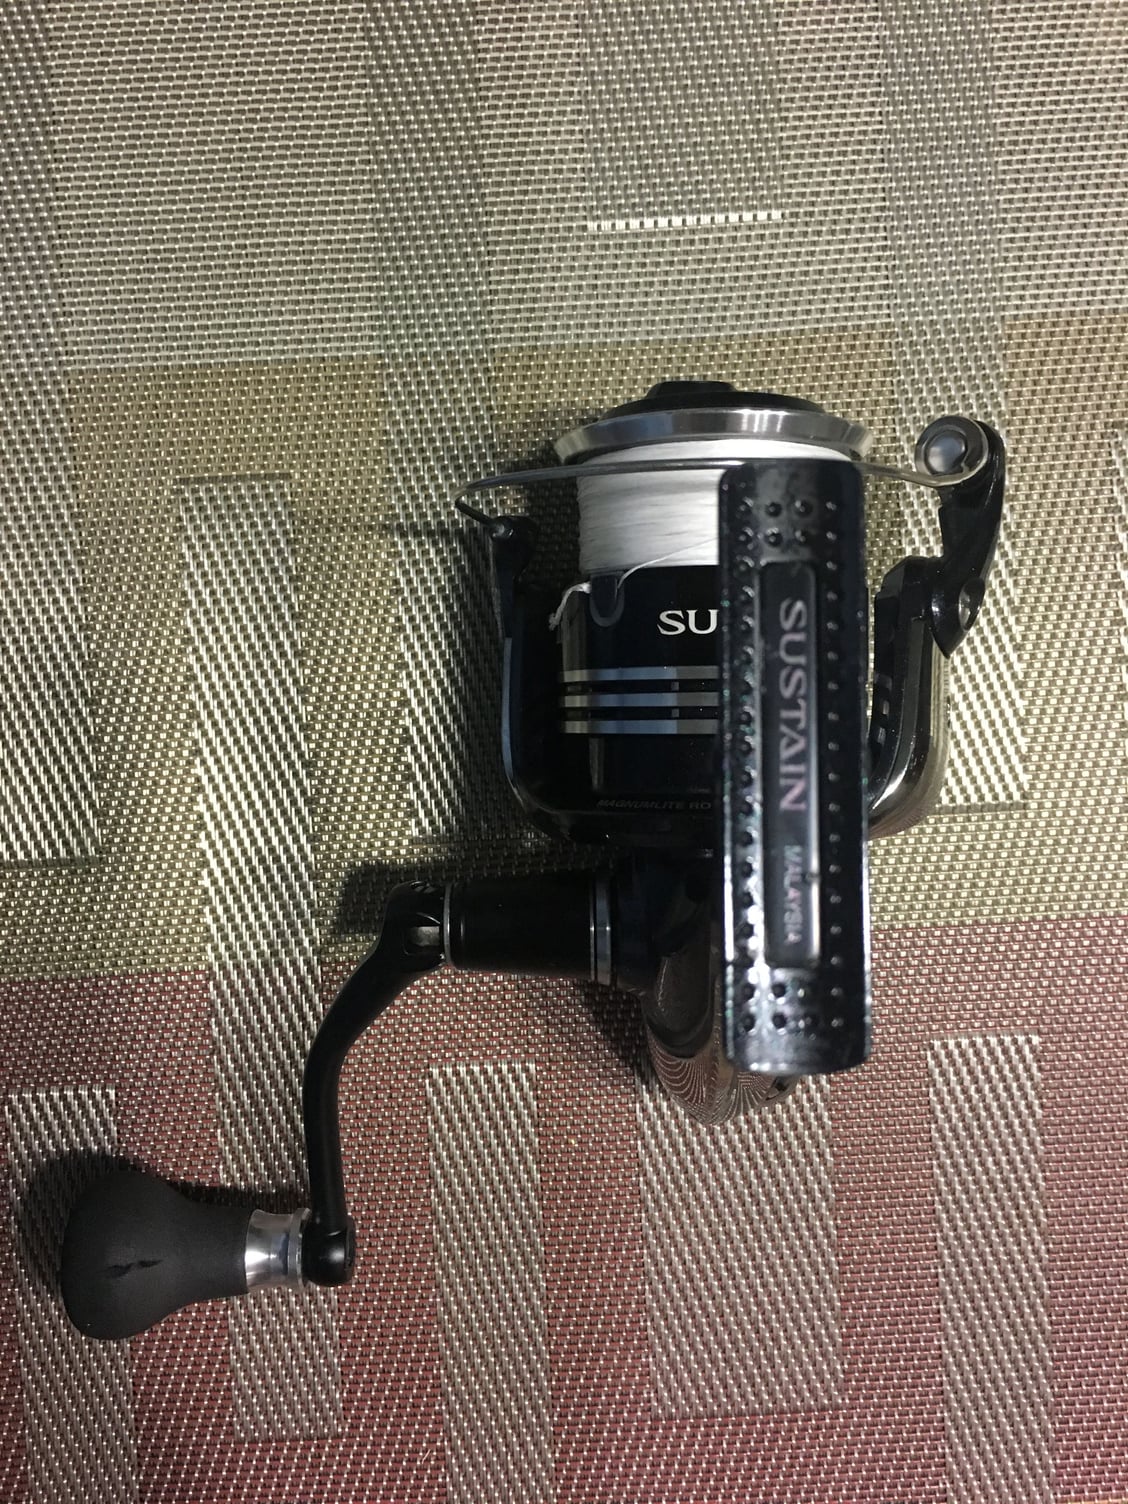 Shimano Sustain 4000 FG - The Hull Truth - Boating and Fishing Forum